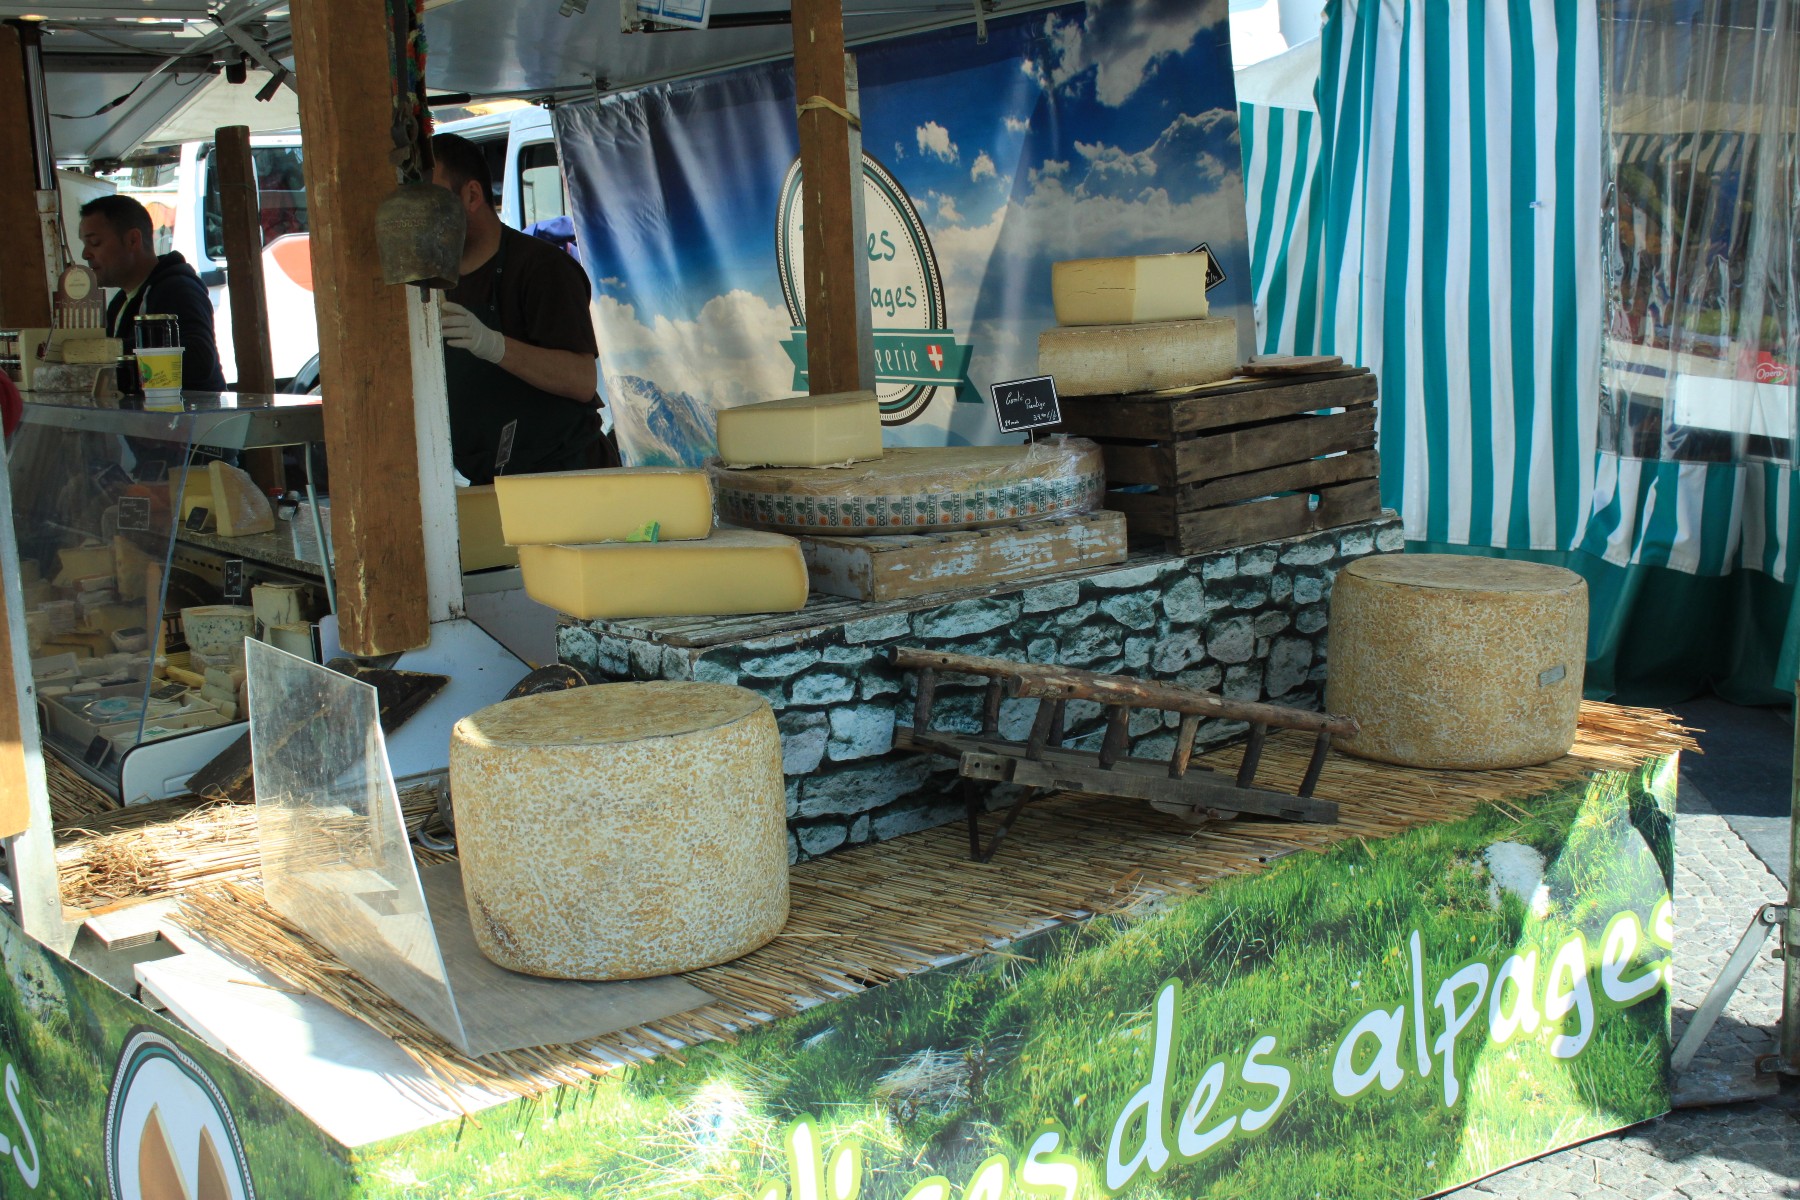 Cheese sold at a market in Luxembourg